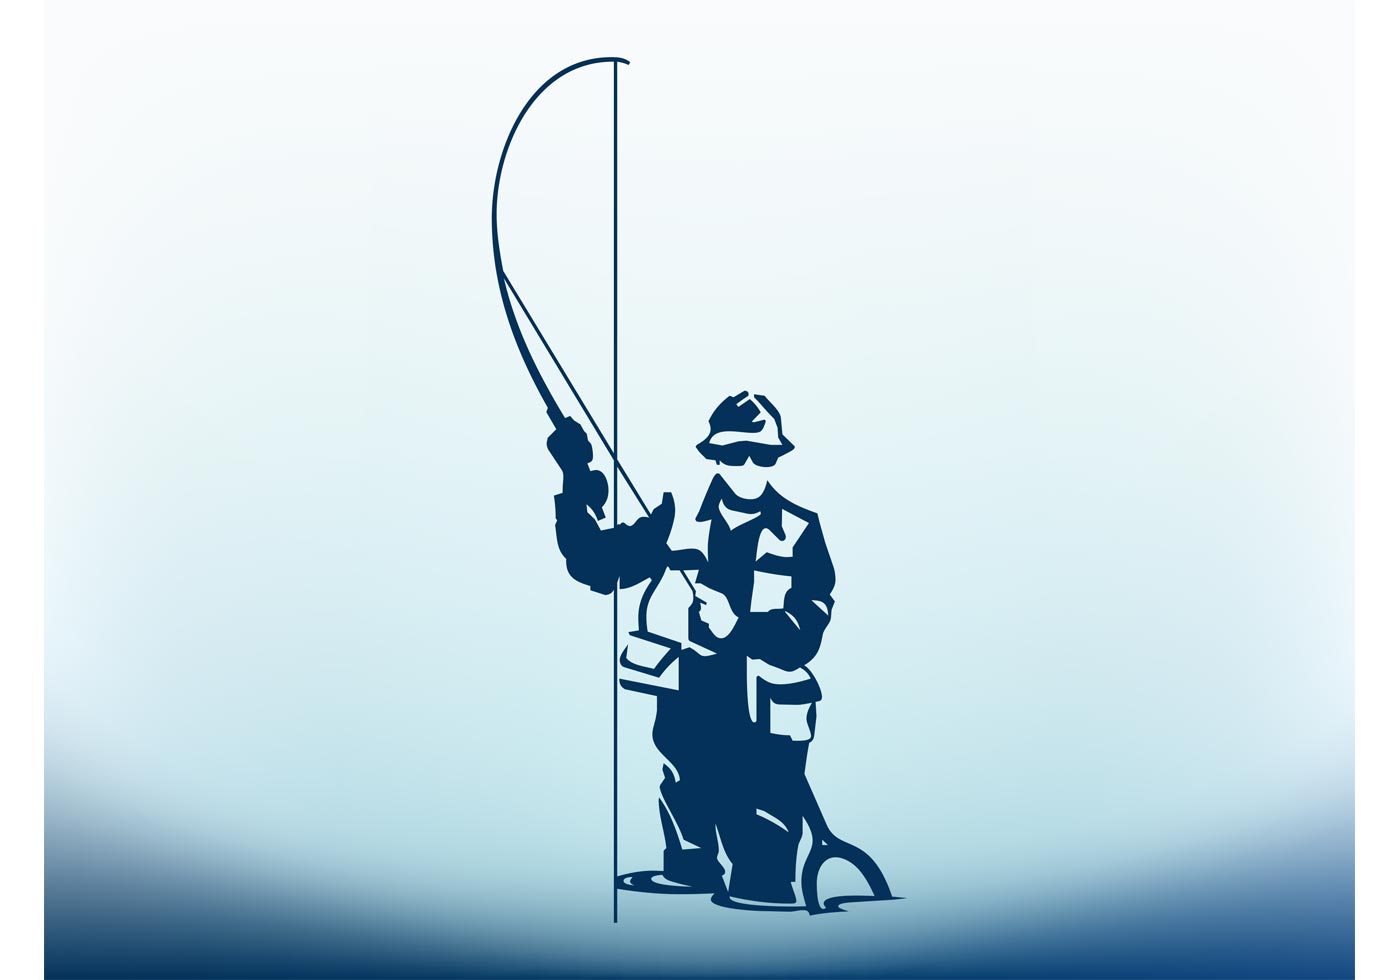 Man With Fishing Pole - Download Free Vector Art, Stock Graphics & Images